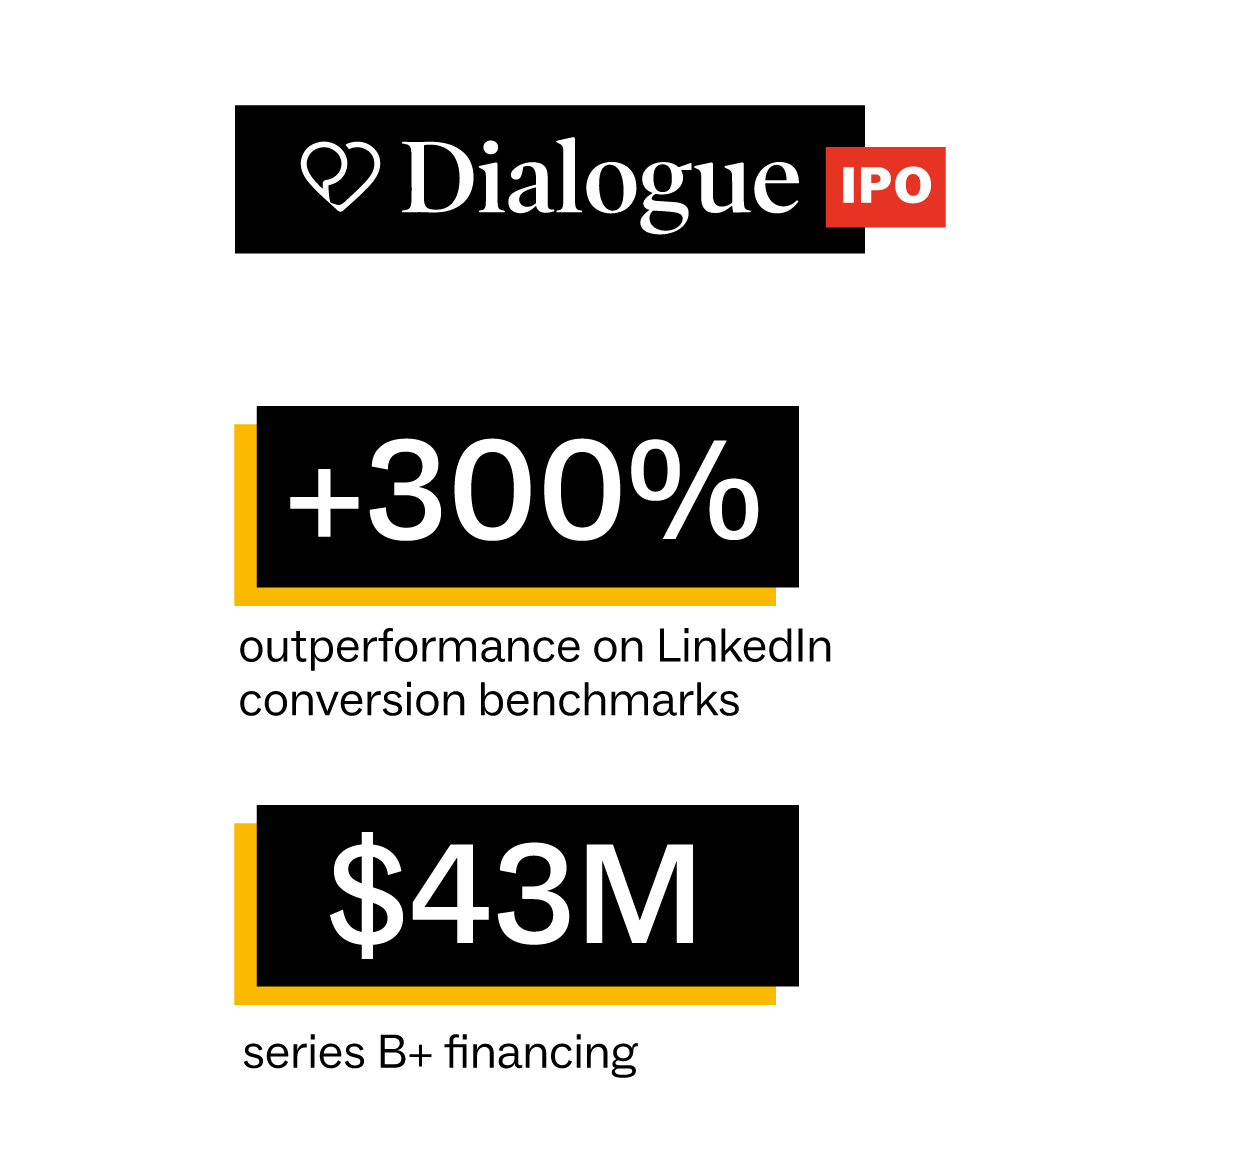 Dialogue +300% outperformance on LinkedIn conversion benchmarks and $43M series B+ financing